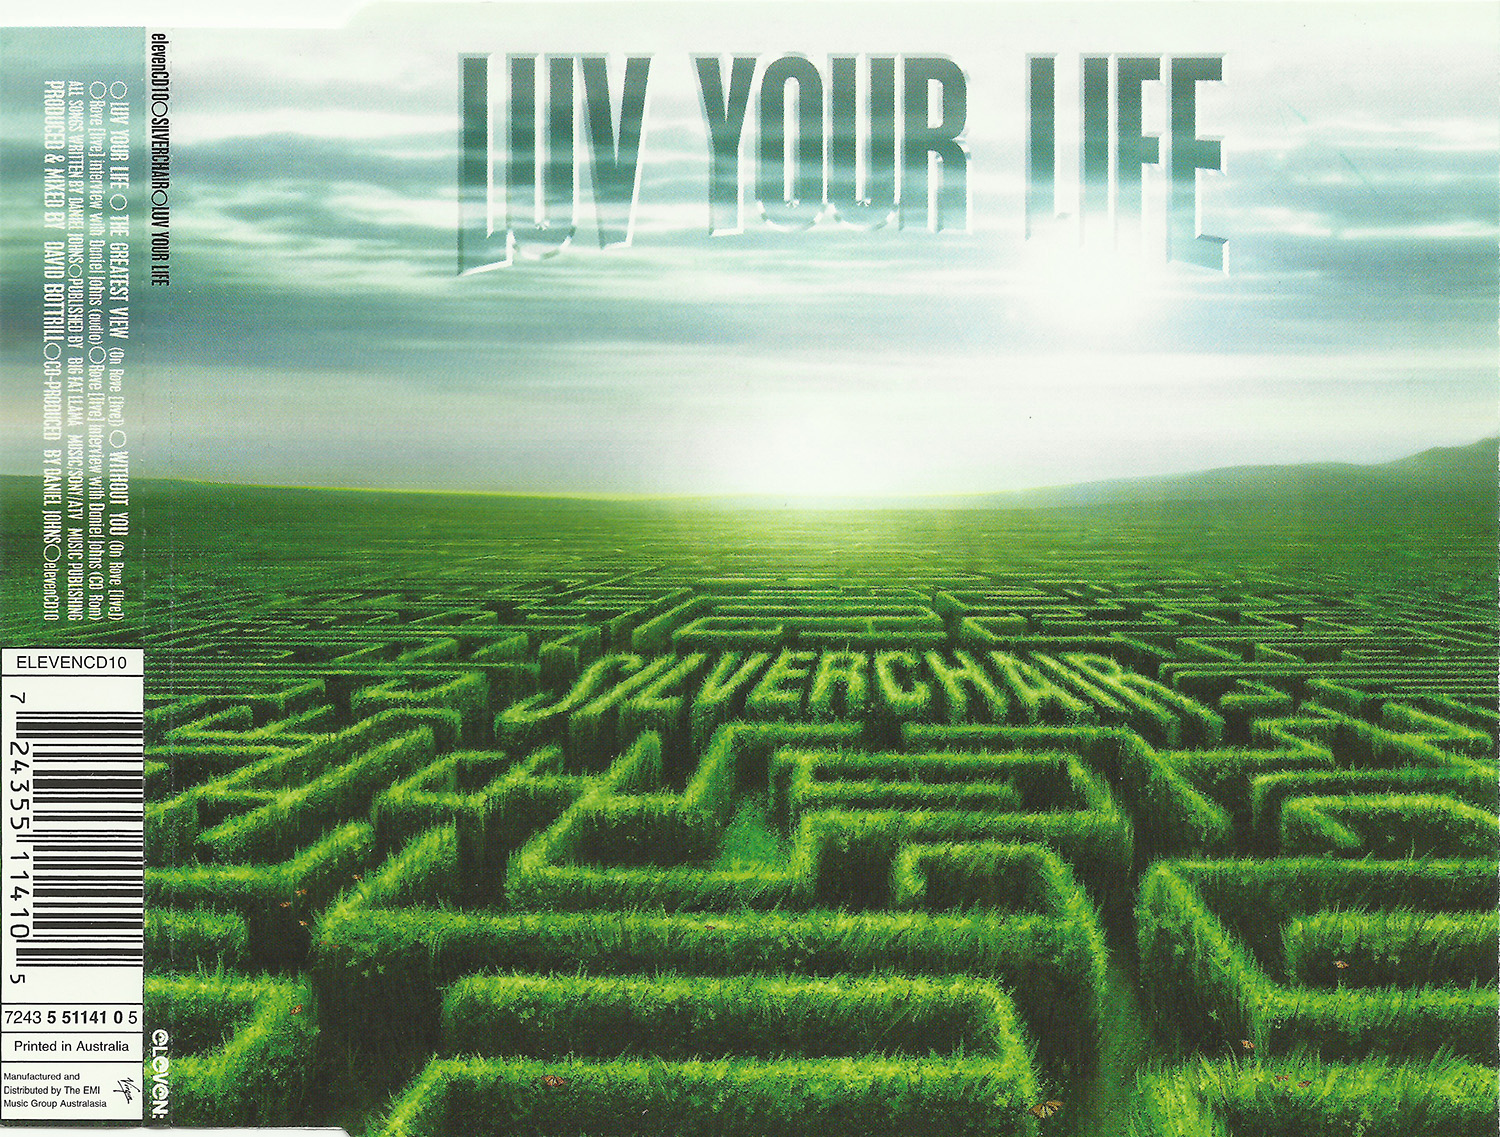 LUV YOUR LIFE cover art